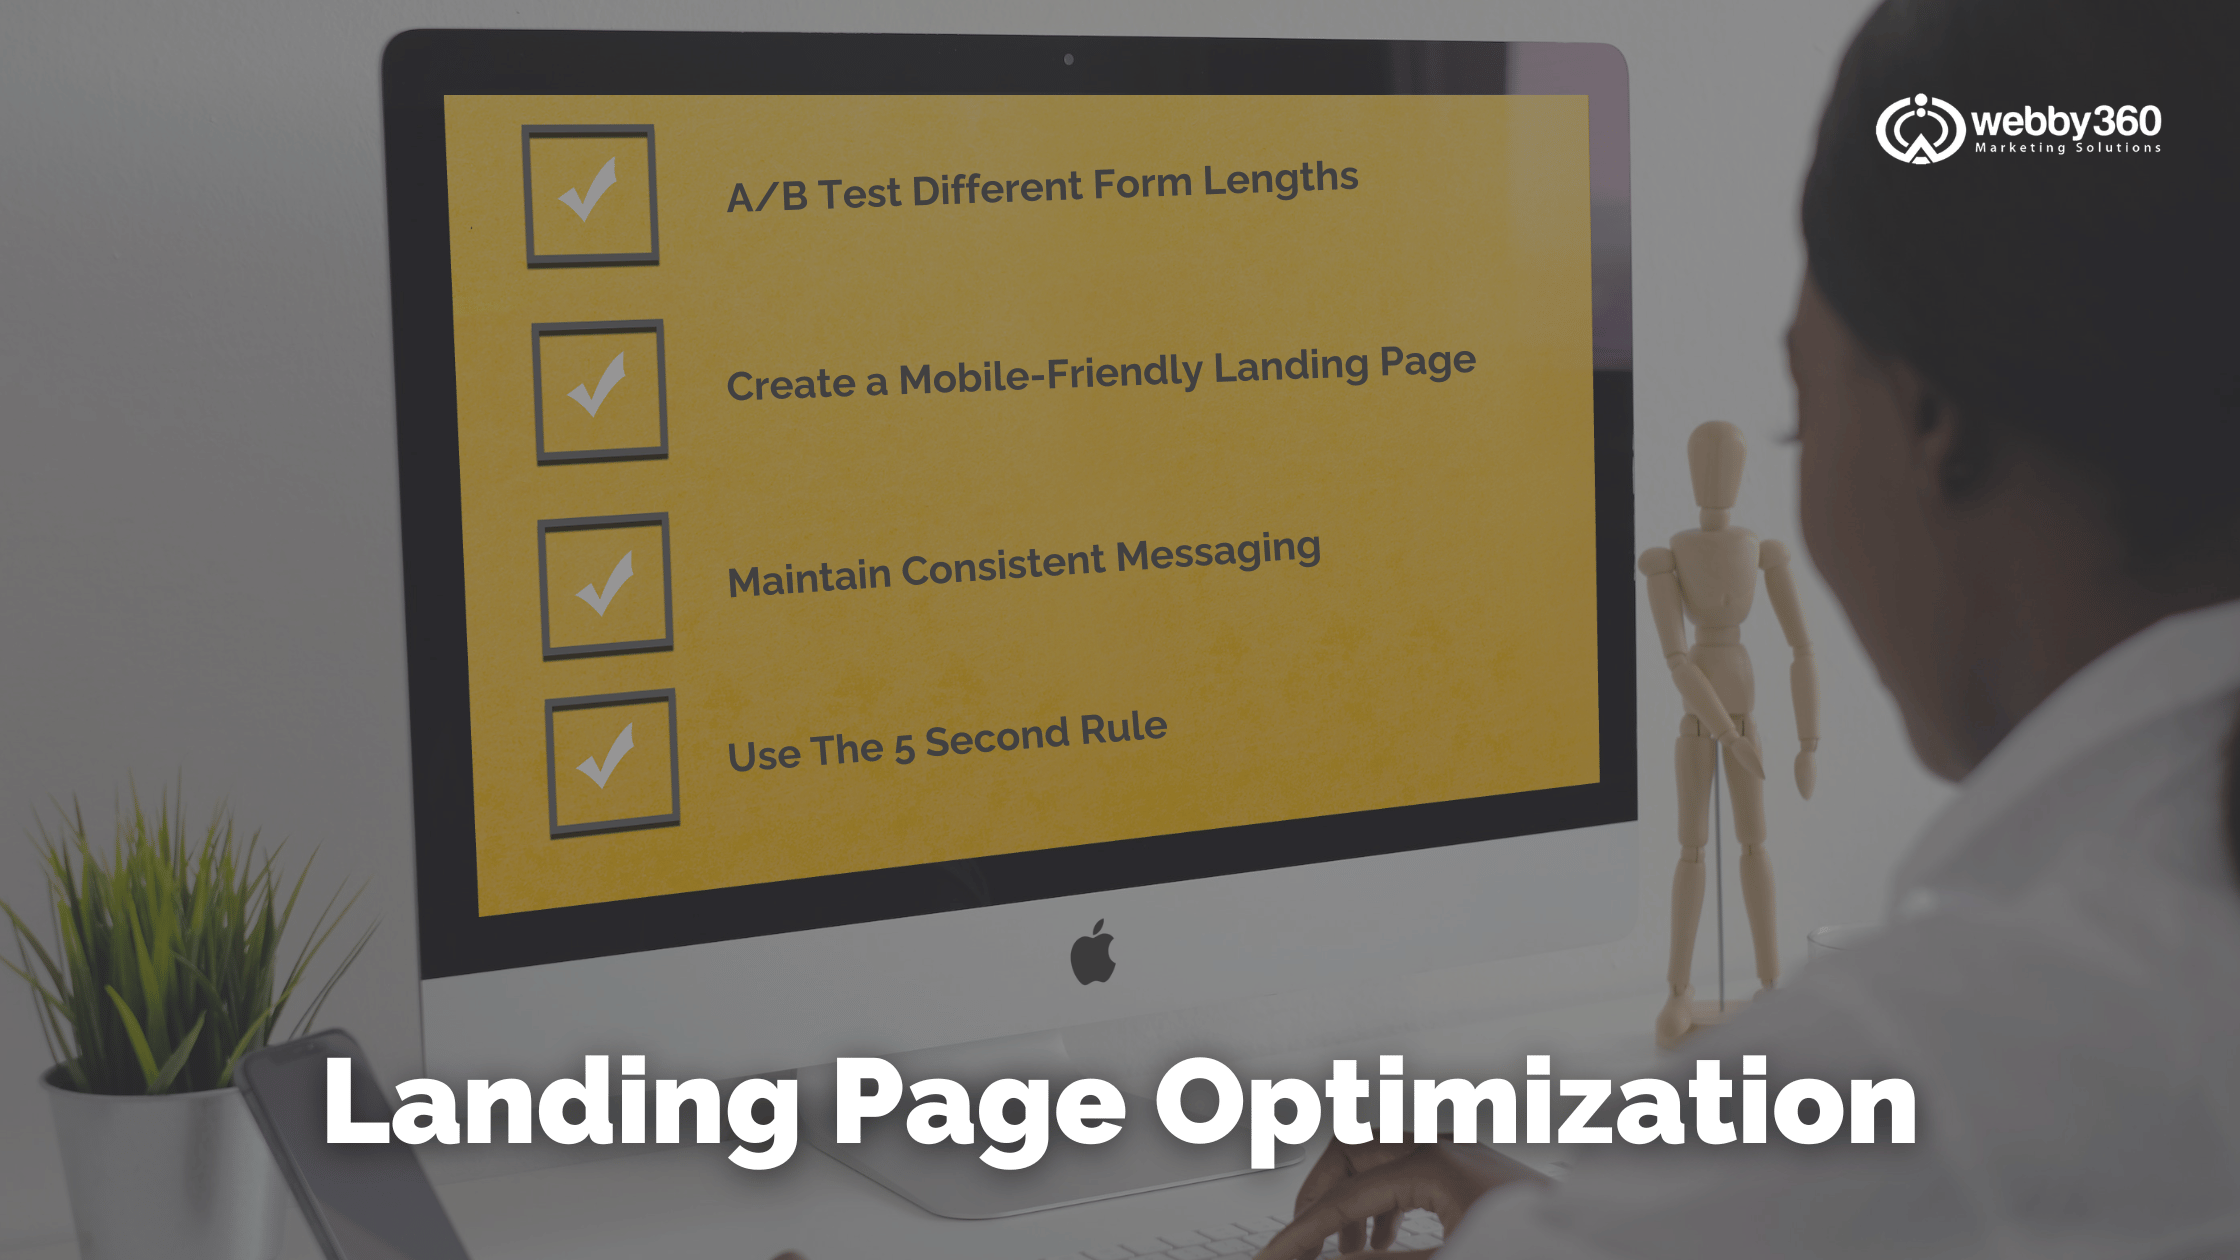 image of a landing page optimization checklist on a laptop screen